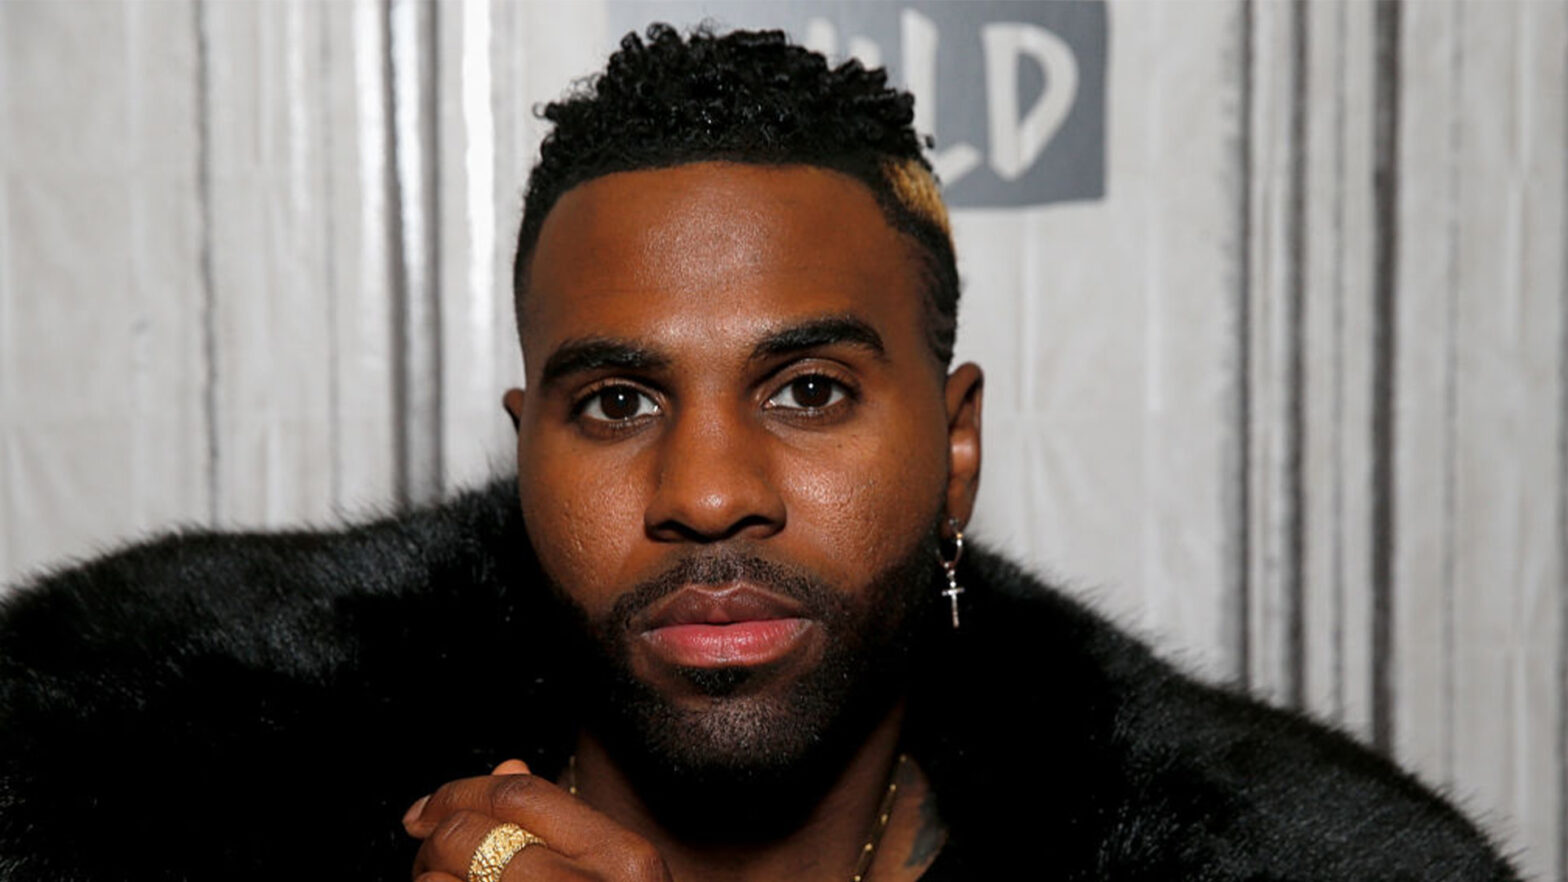 Jason Derulo Has About 13 Sources Of Income, But His 'Highest' Is An Investment In This 'Unsexy' Company Valued At $2B